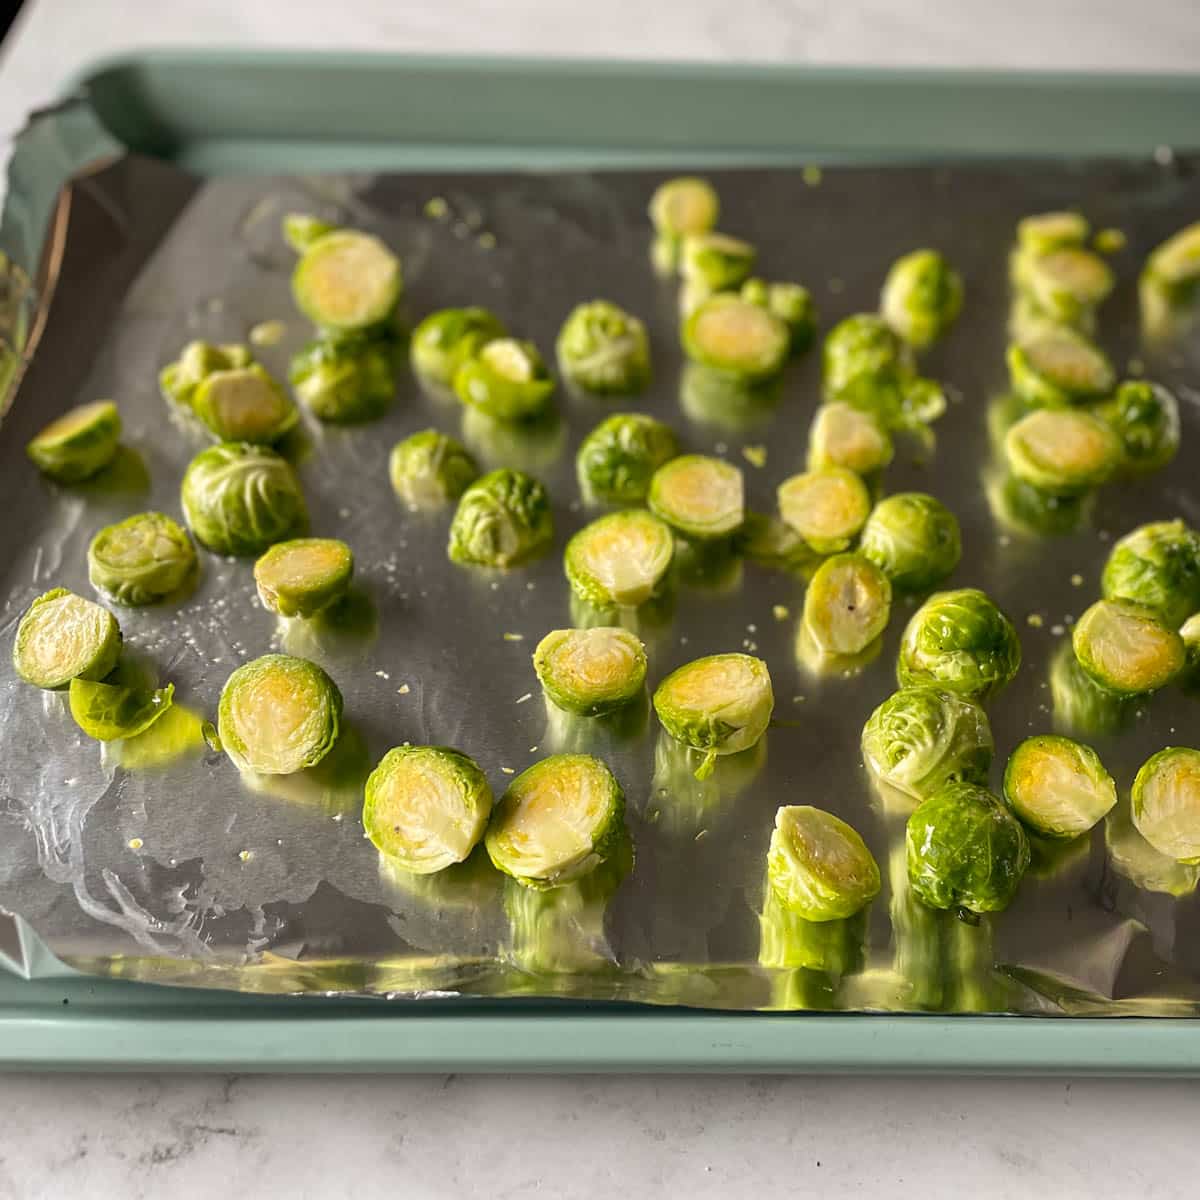 Halved brussels sprouts coated in oil and salt sit on on a sheet tray.